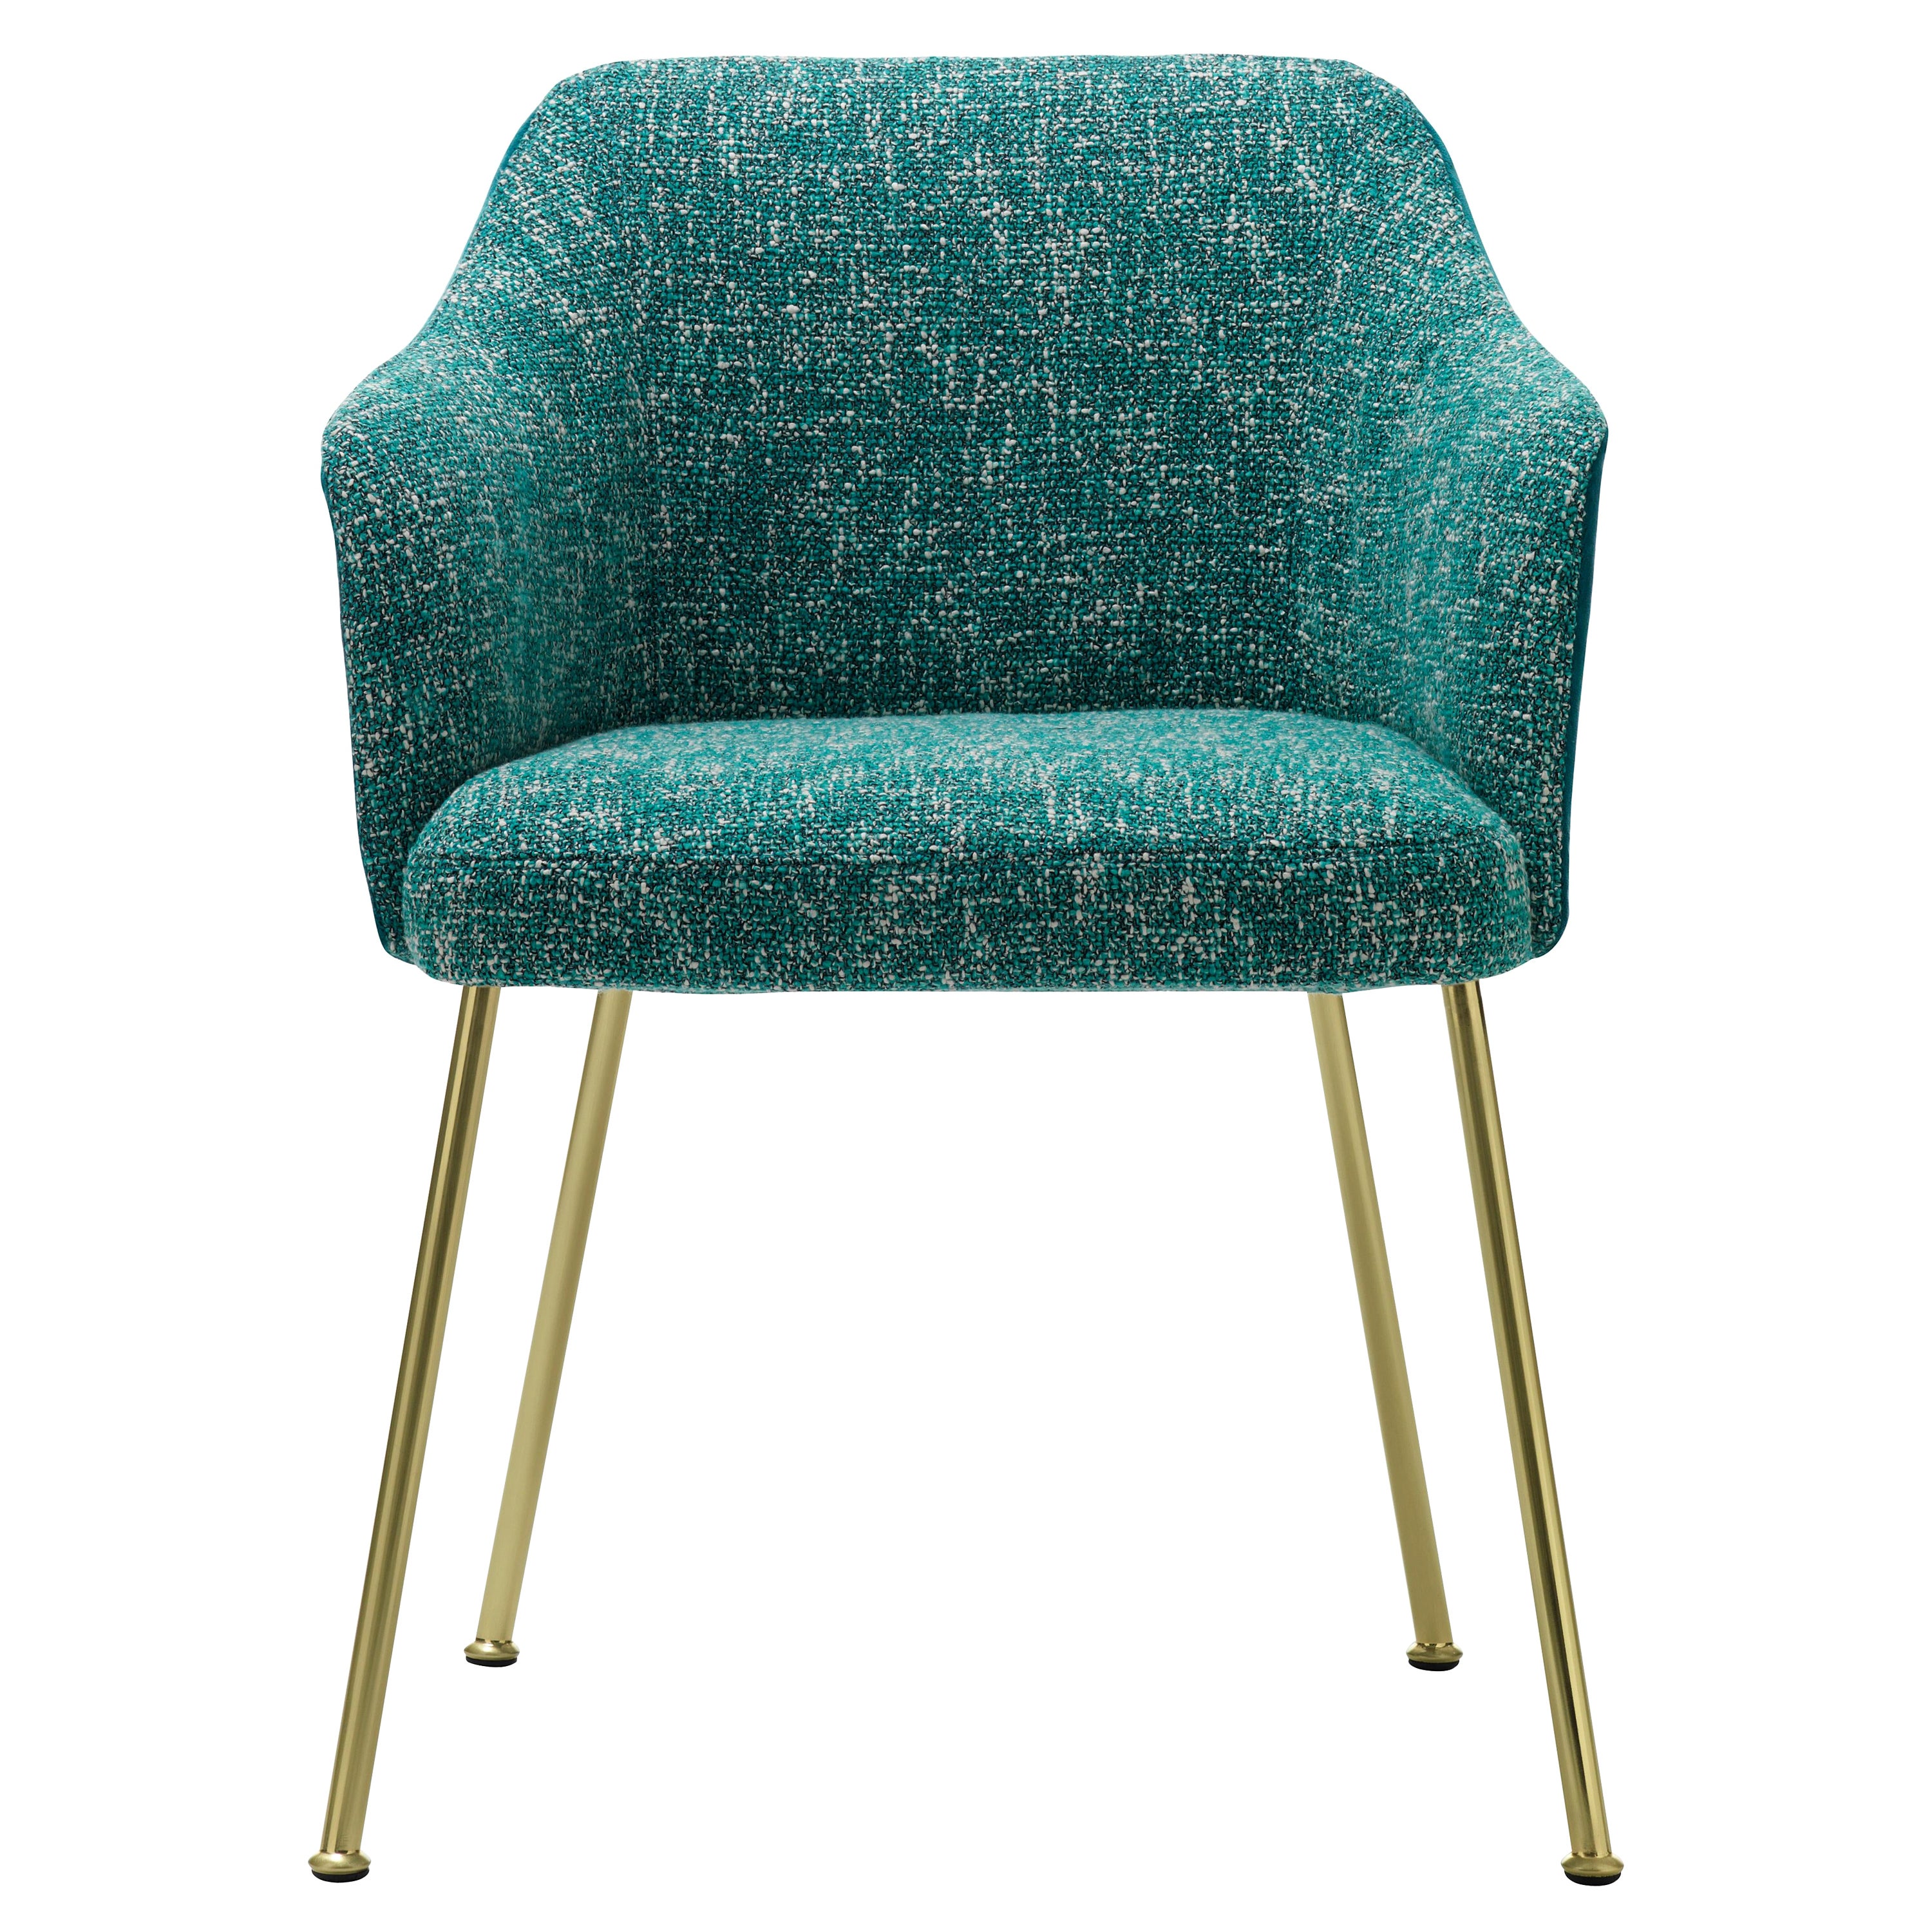 Isabelle Chair in Seventy Green Upholstery with Satin Brass Legs by Saba For Sale